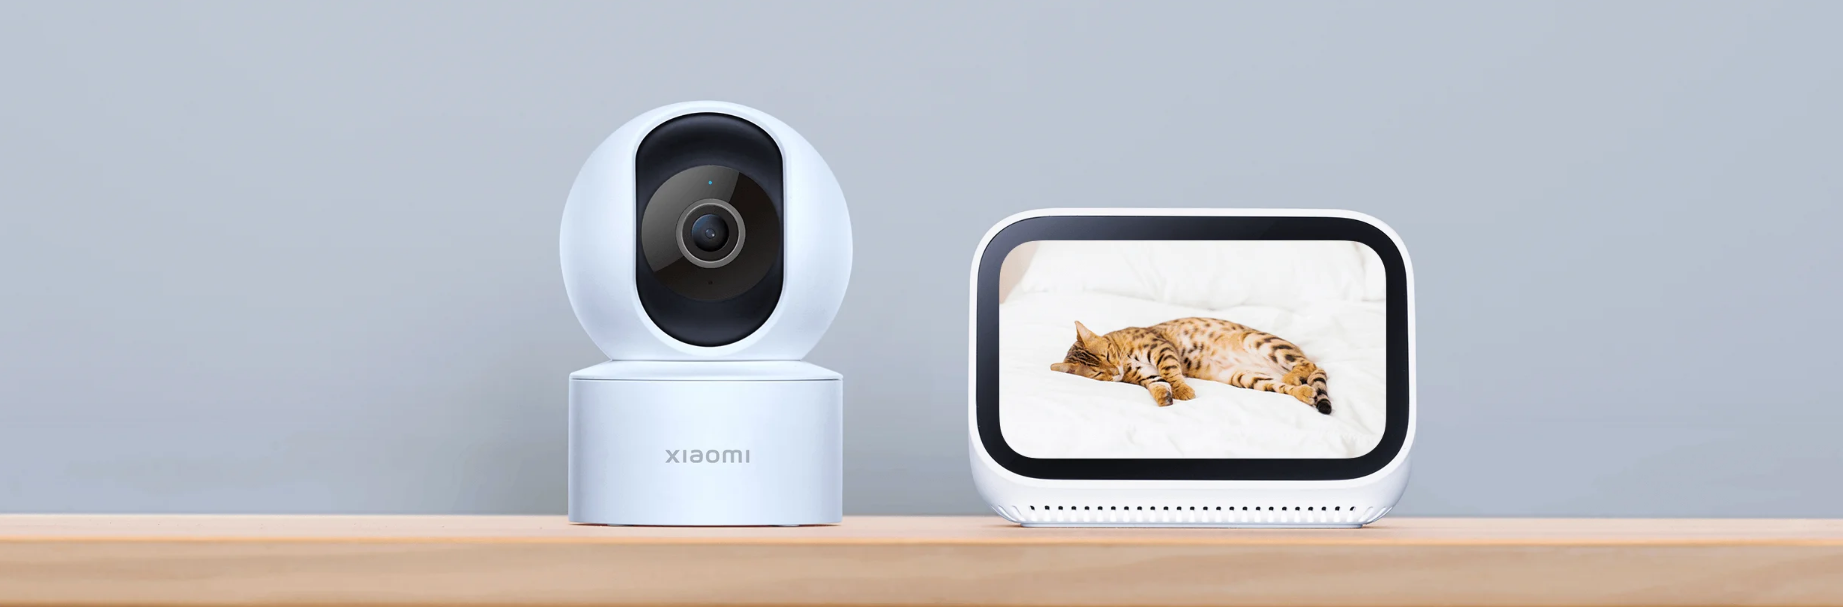 new_xiaomi_smart_camera_c200_Connect_and_view_video_output_on_your_other_smart_home_devices_sold_by_Technomobi